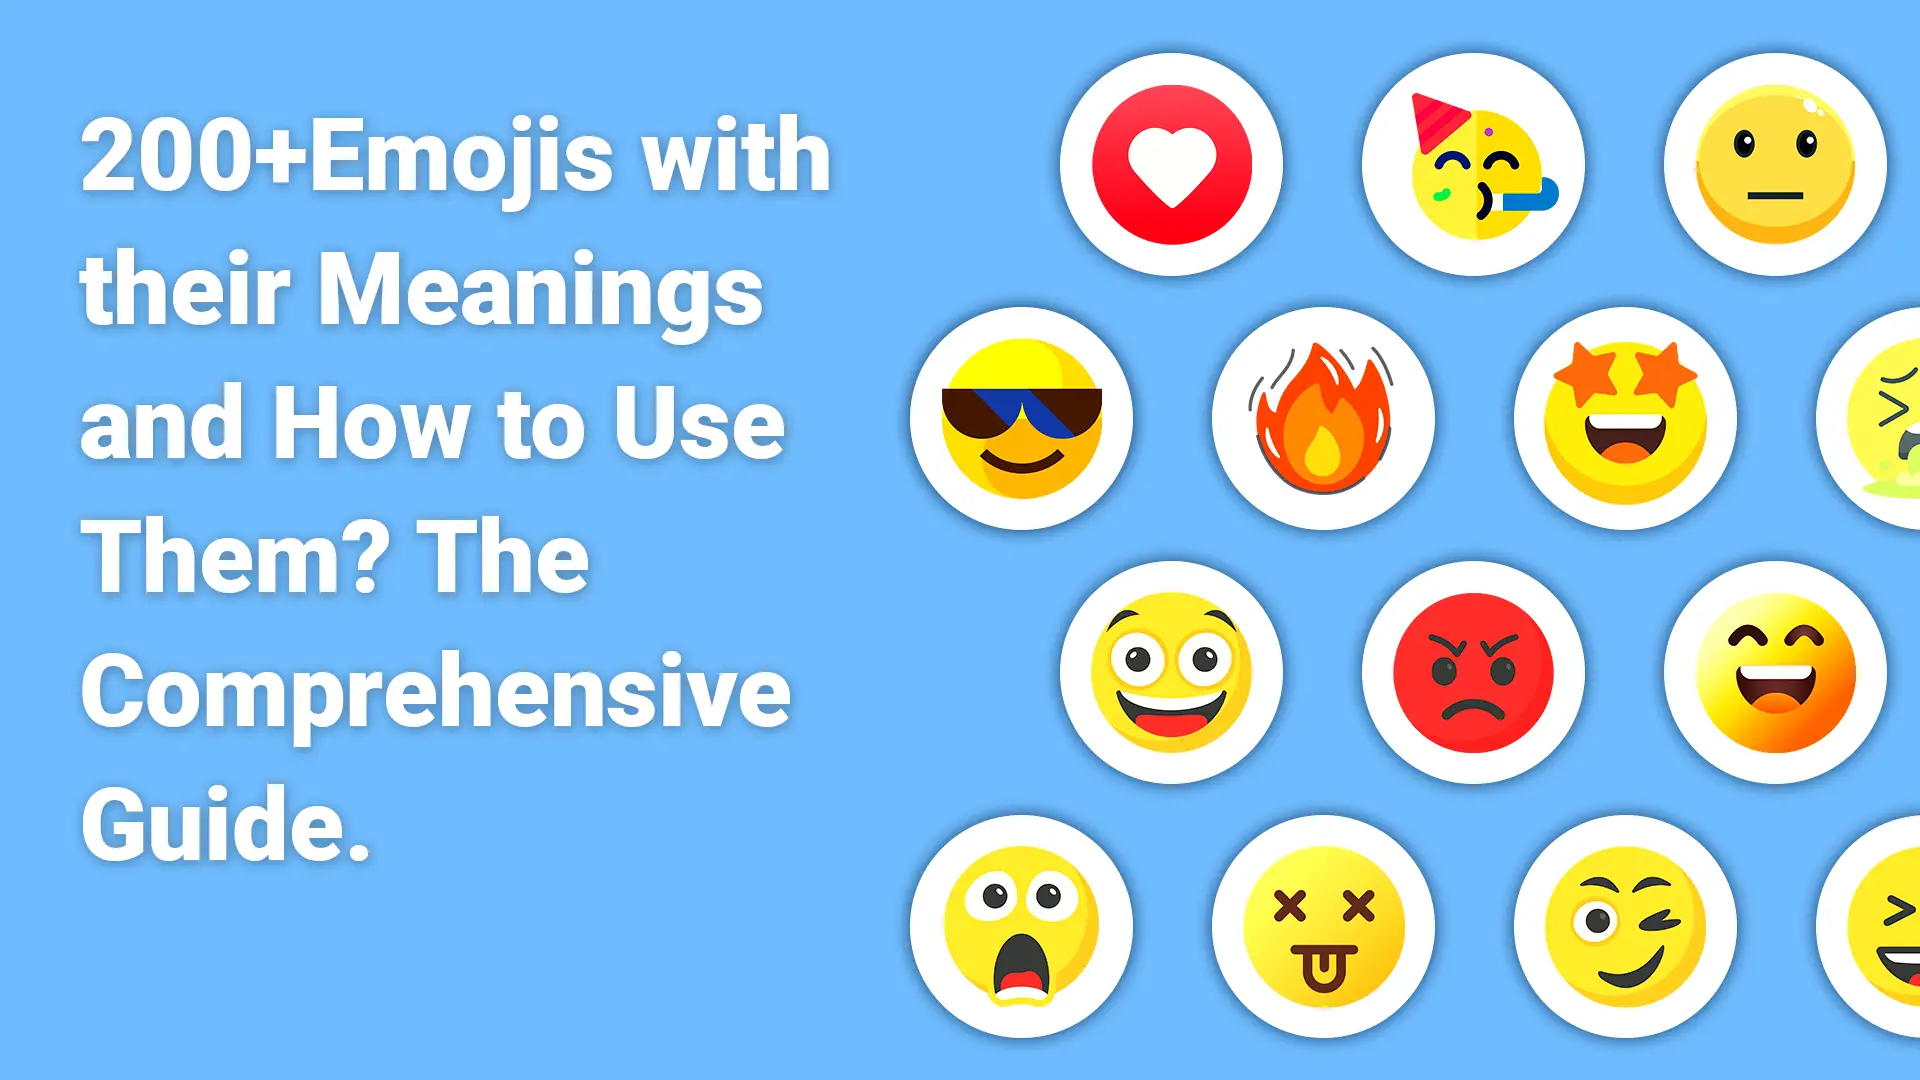 Emojis and their meanings